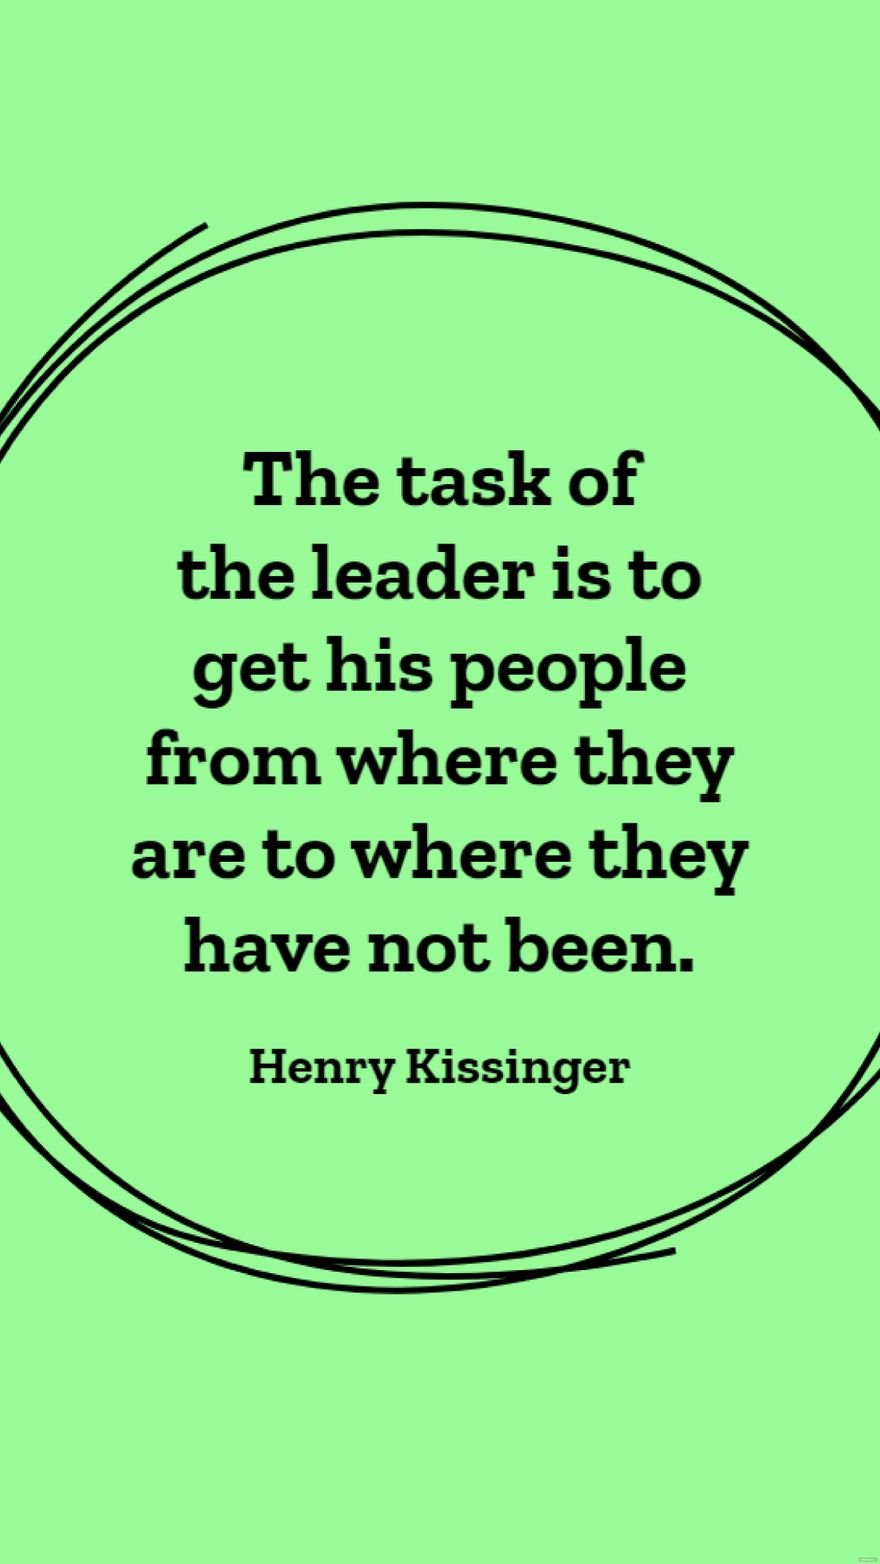 Henry Kissinger - The task of the leader is to get his people from where they are to where they have not been.